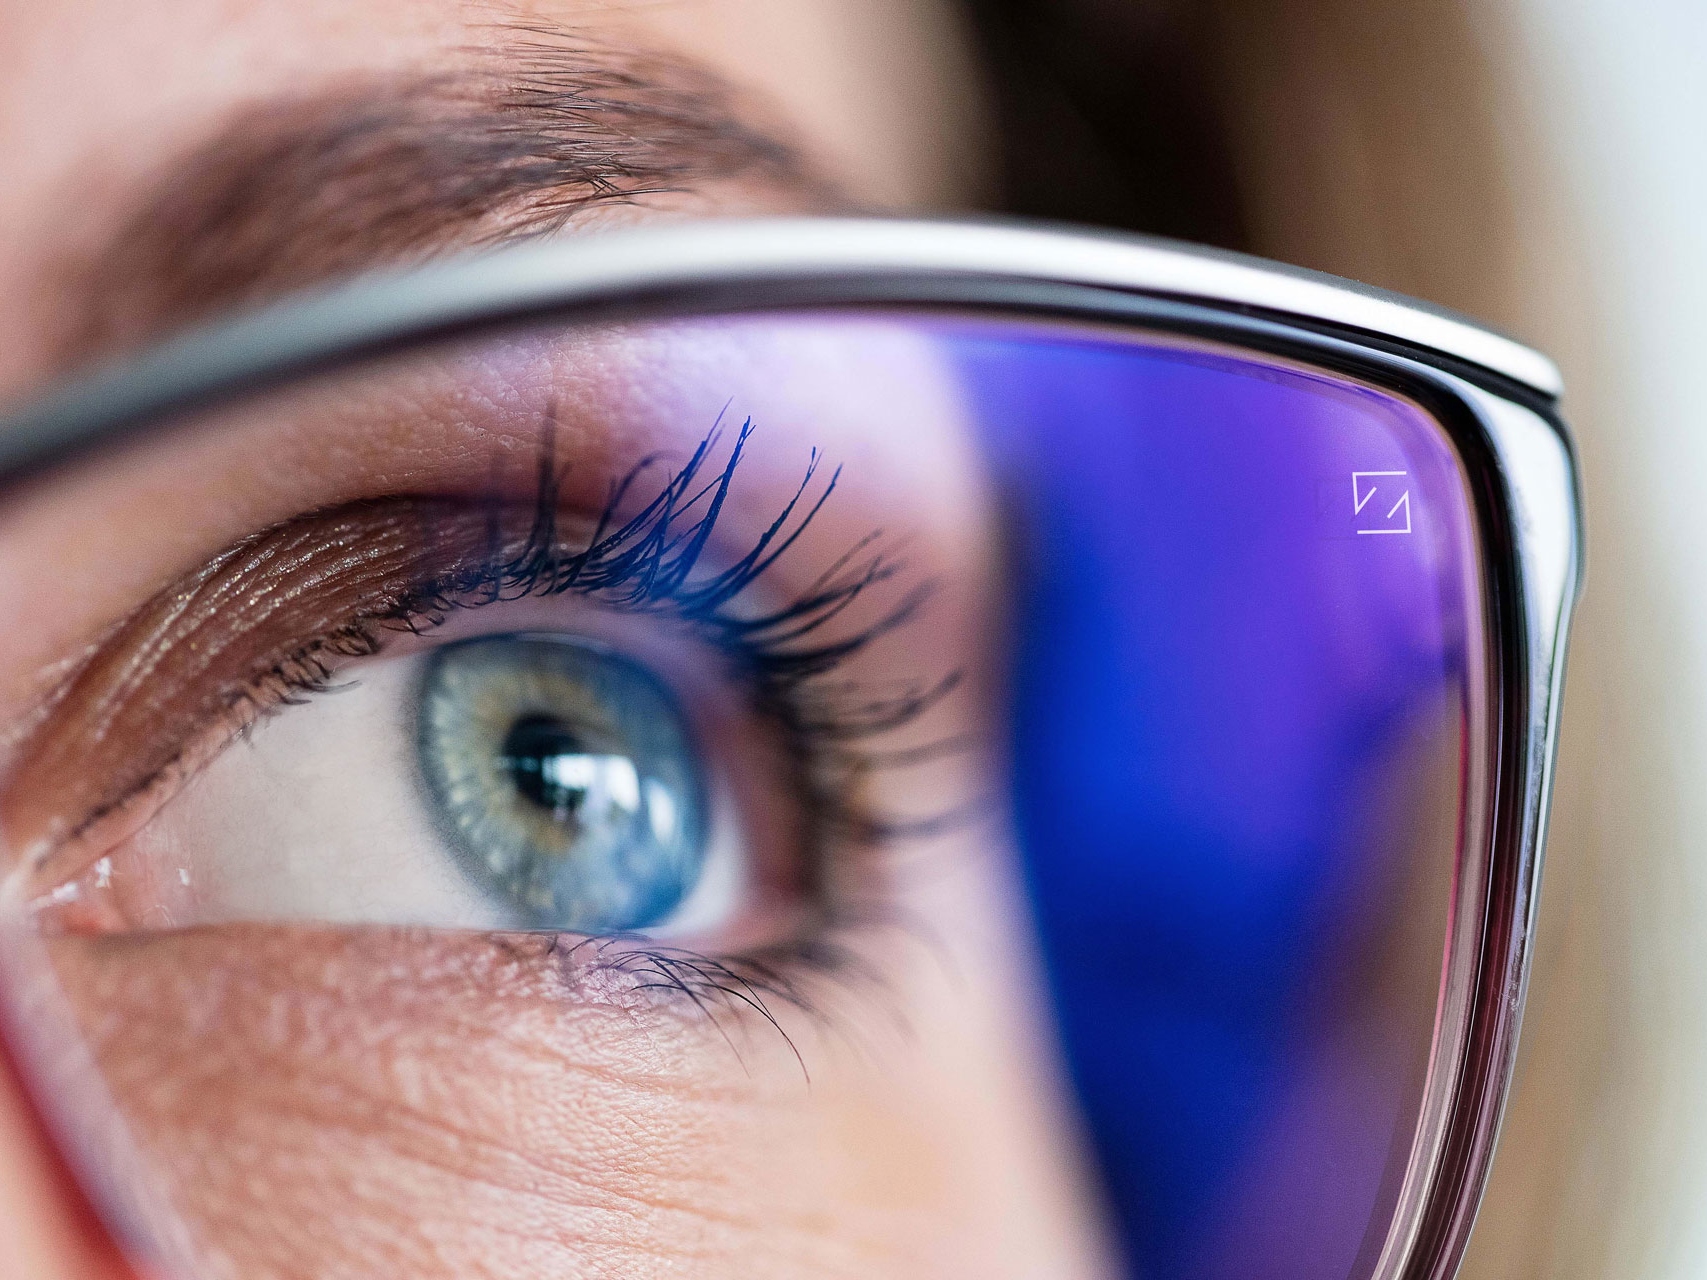 ZEISS on your spectacle lens